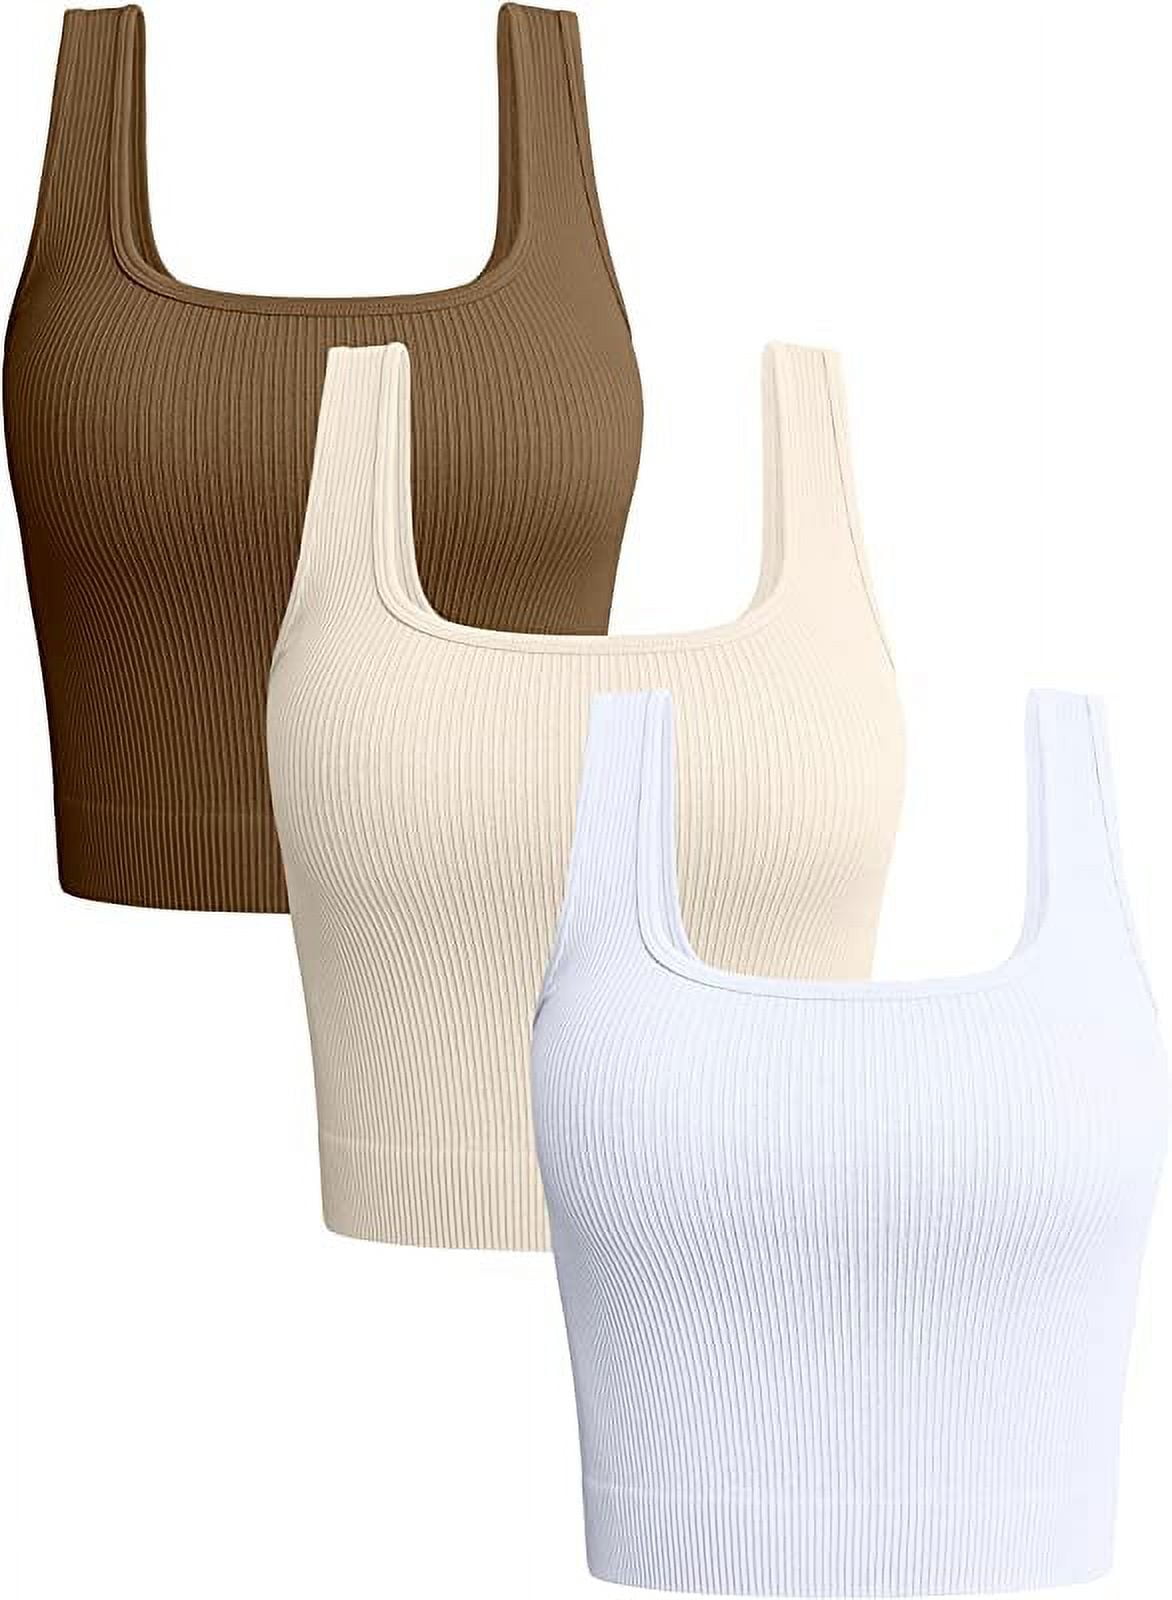 OQQ Women's 3 Piece Tank Tops Ribbed Seamless Workout Exercise Shirts  Yoga Crop Tops 